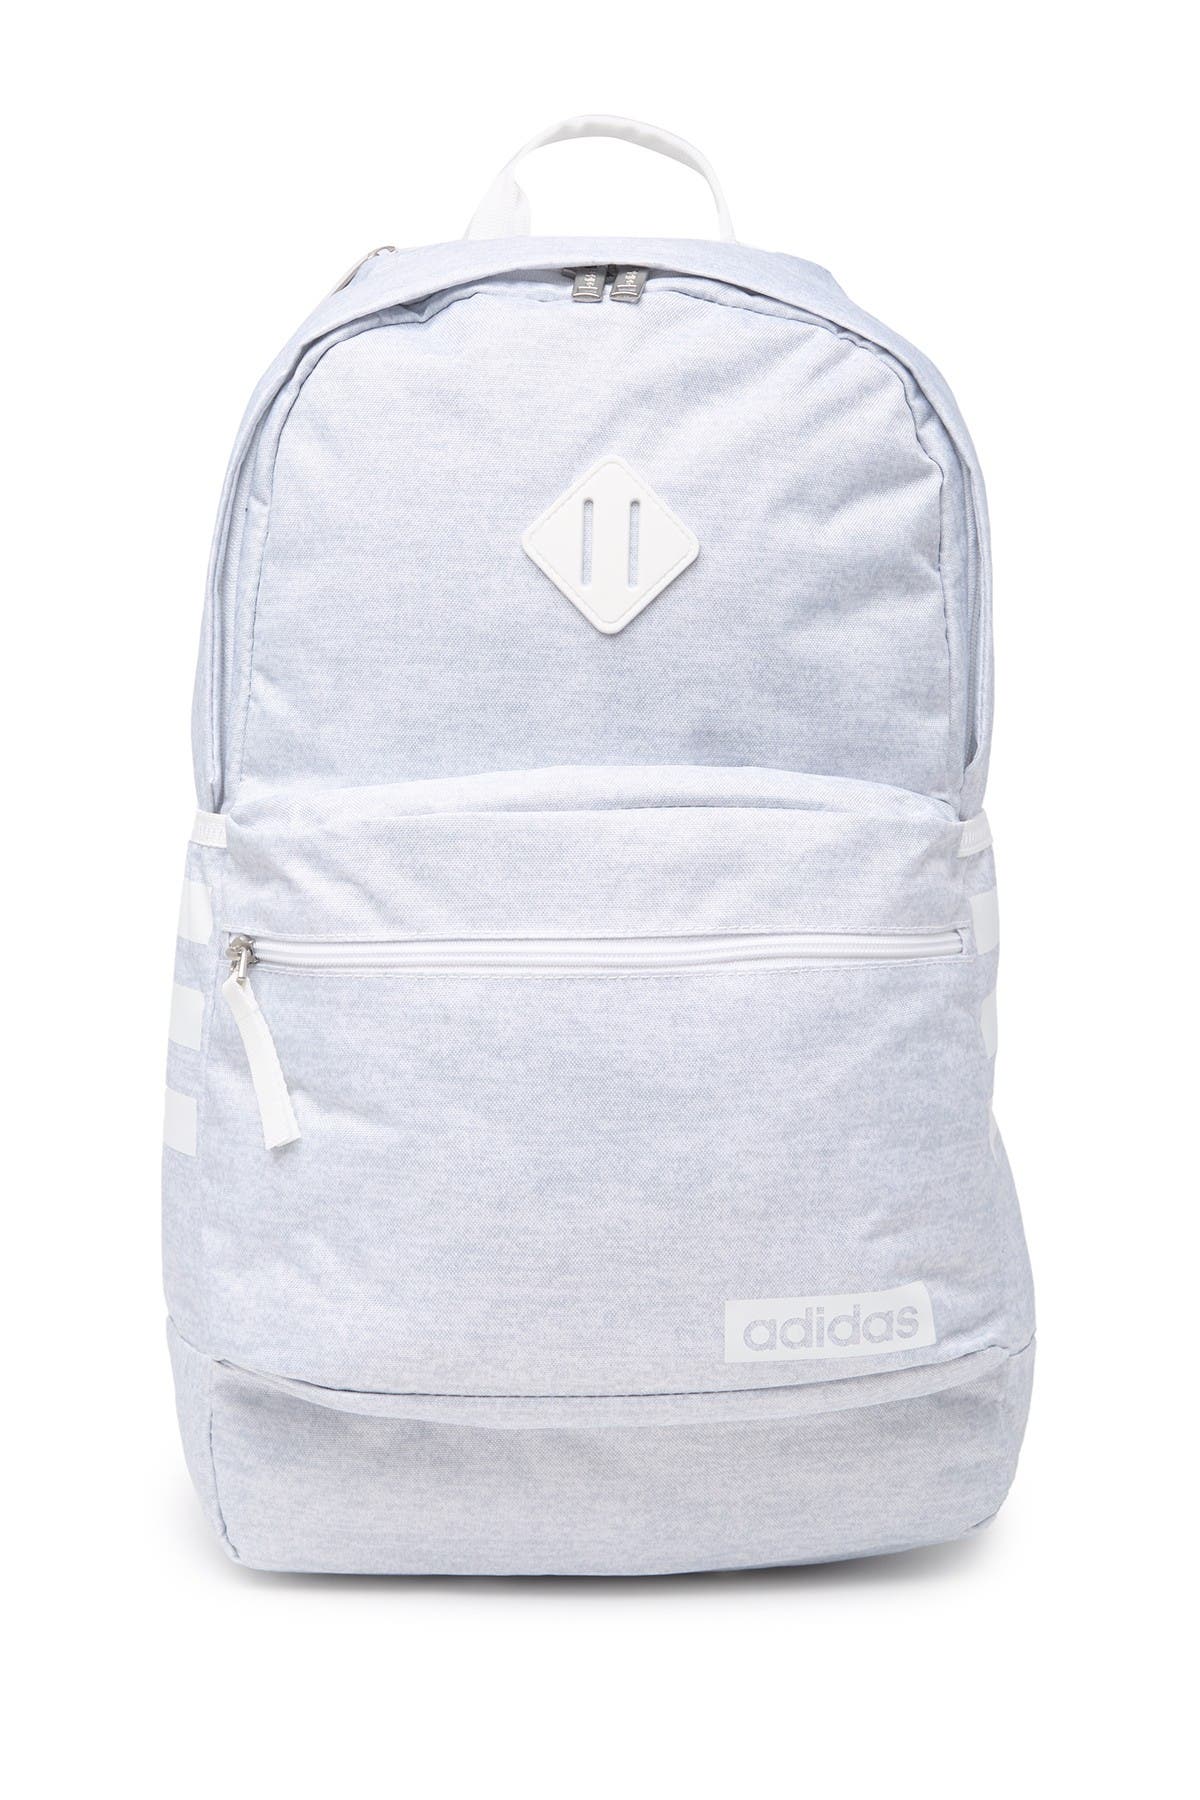 adidas | Classic 3S Backpack 